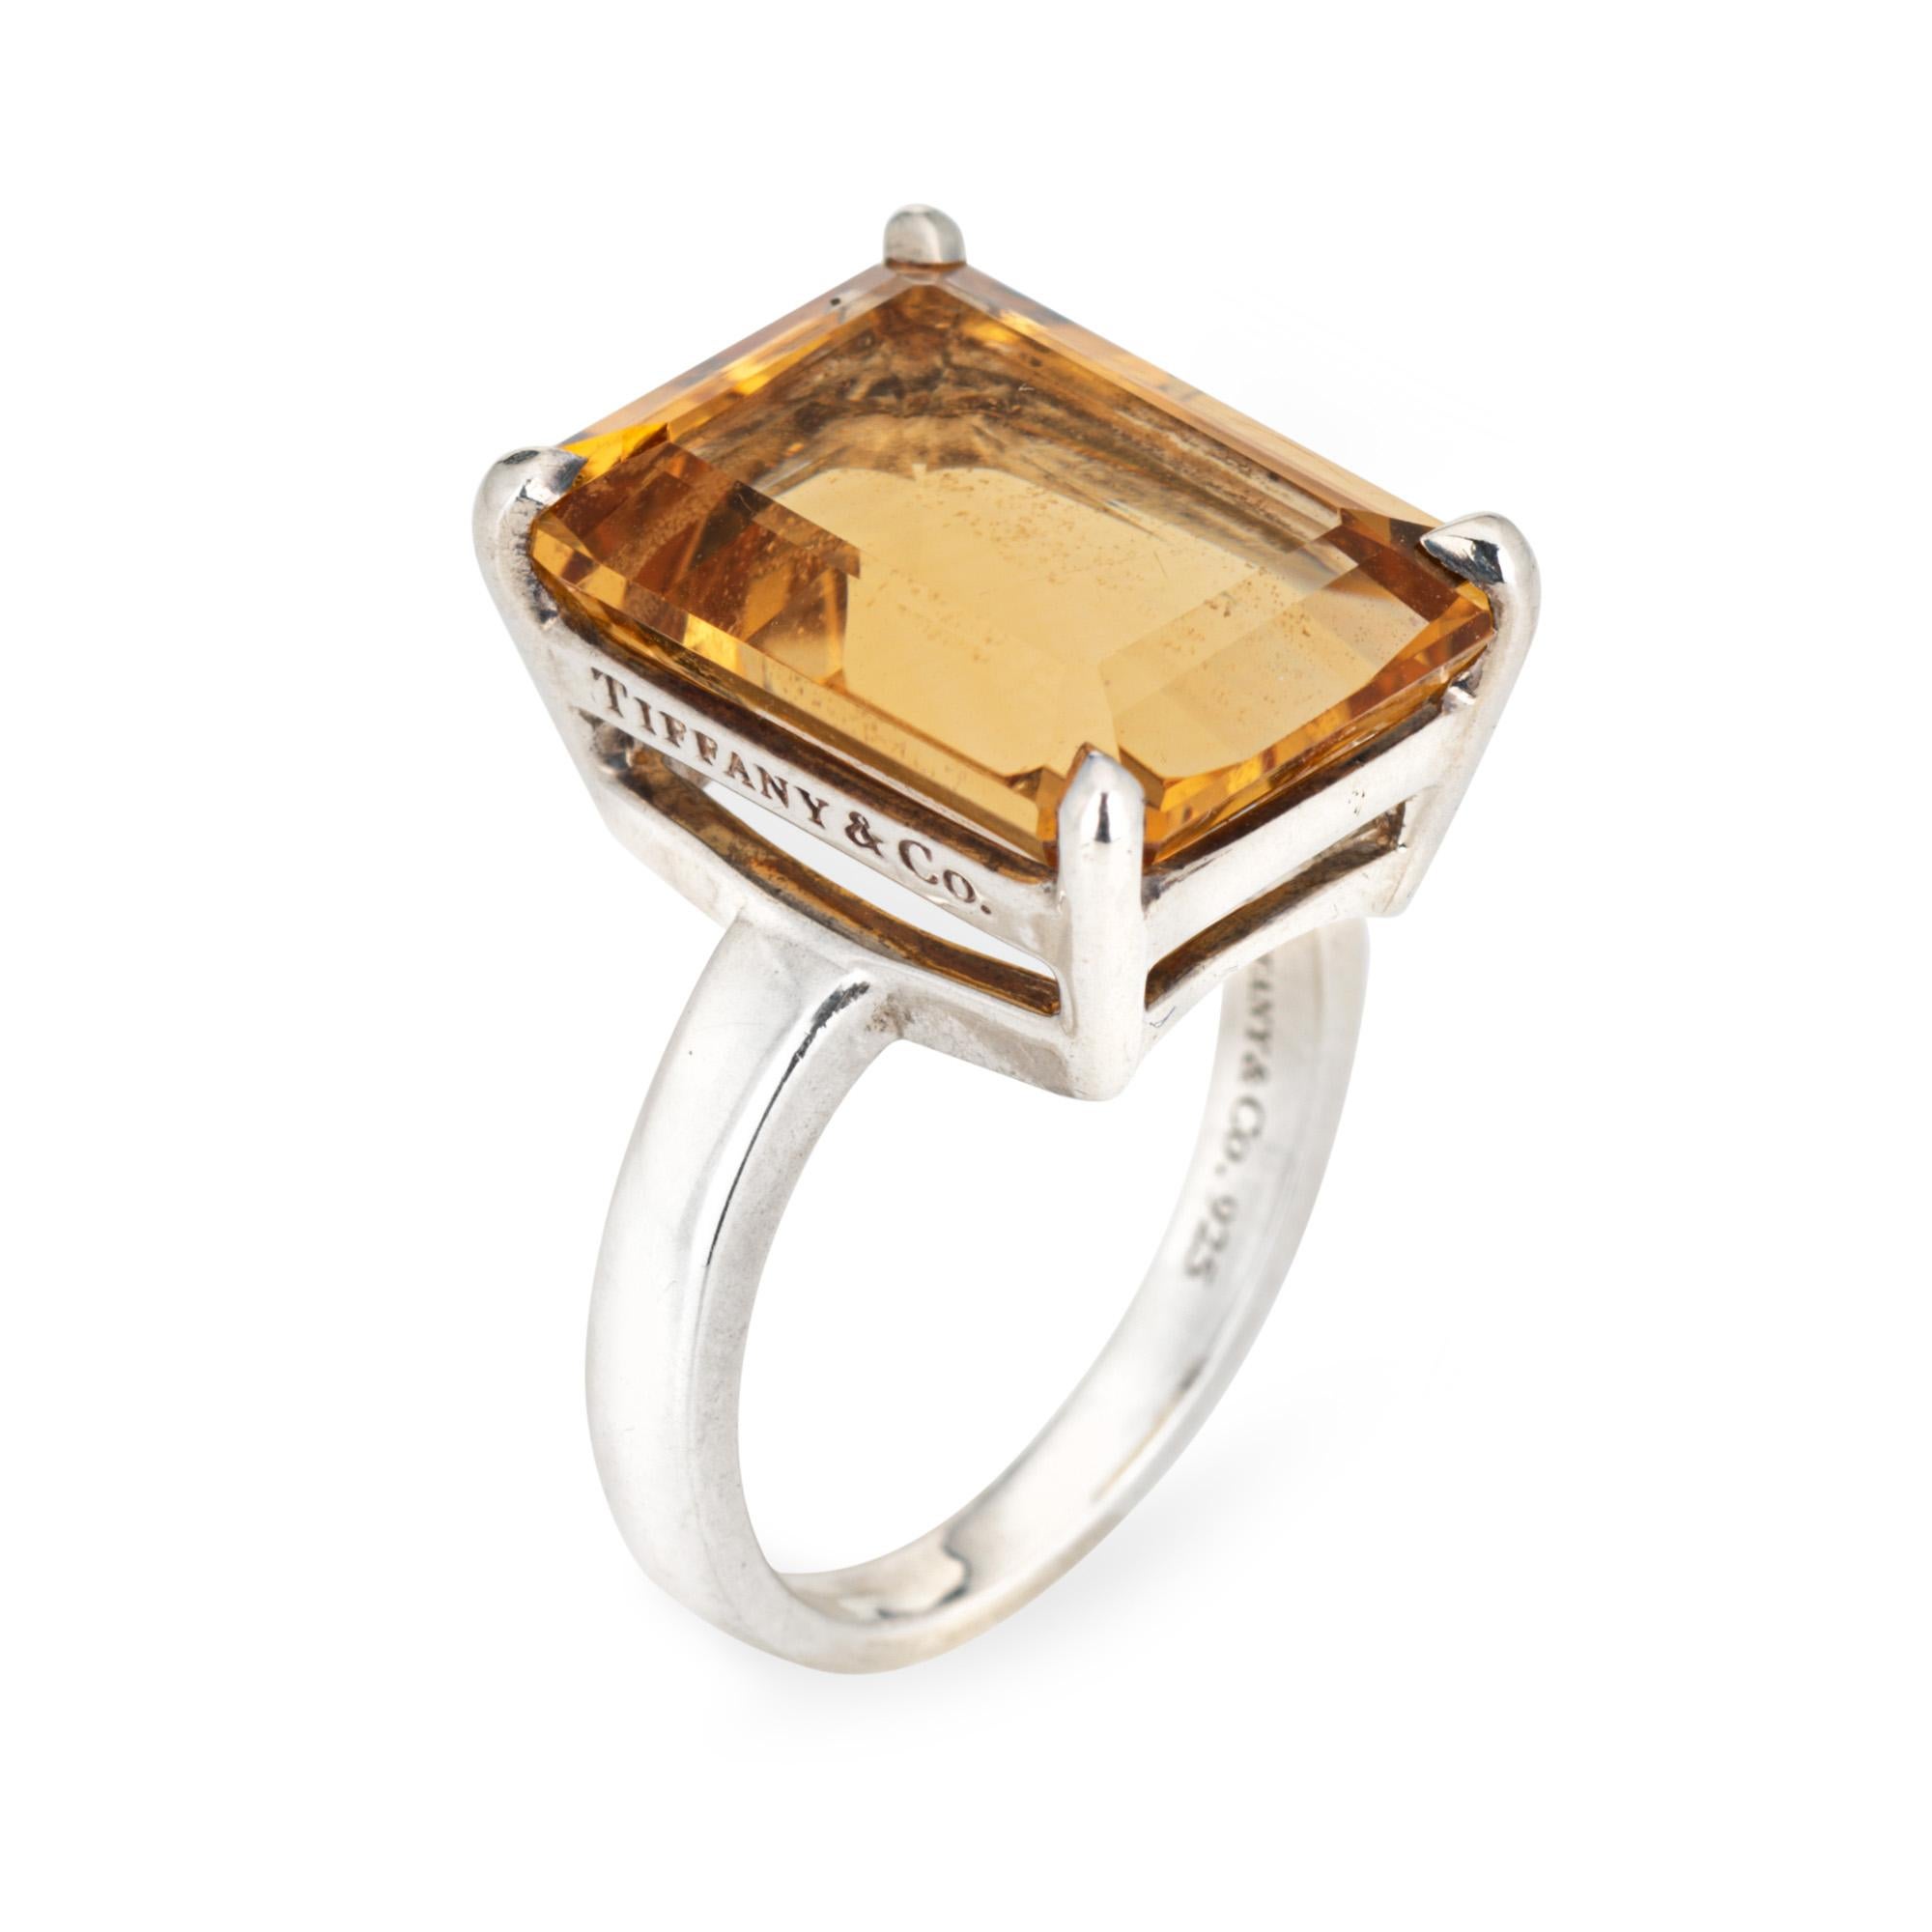 Pre-owned Tiffany & Co citrine 